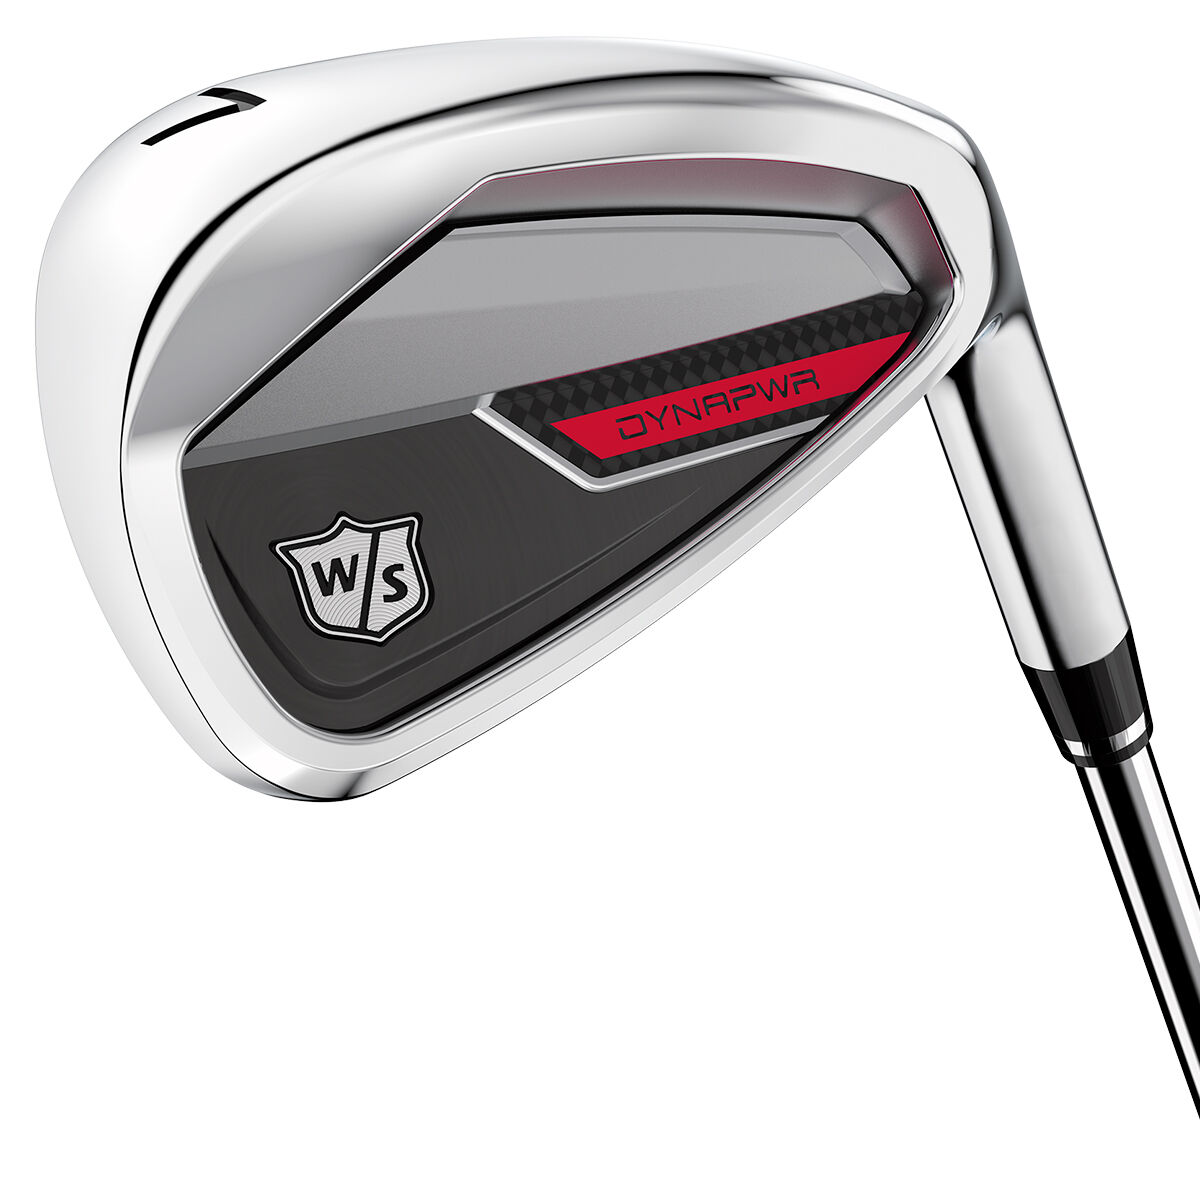 Wilson Staff Grey and Red Dynapower Graphite Custom Fit Golf Irons | American Golf, One Size